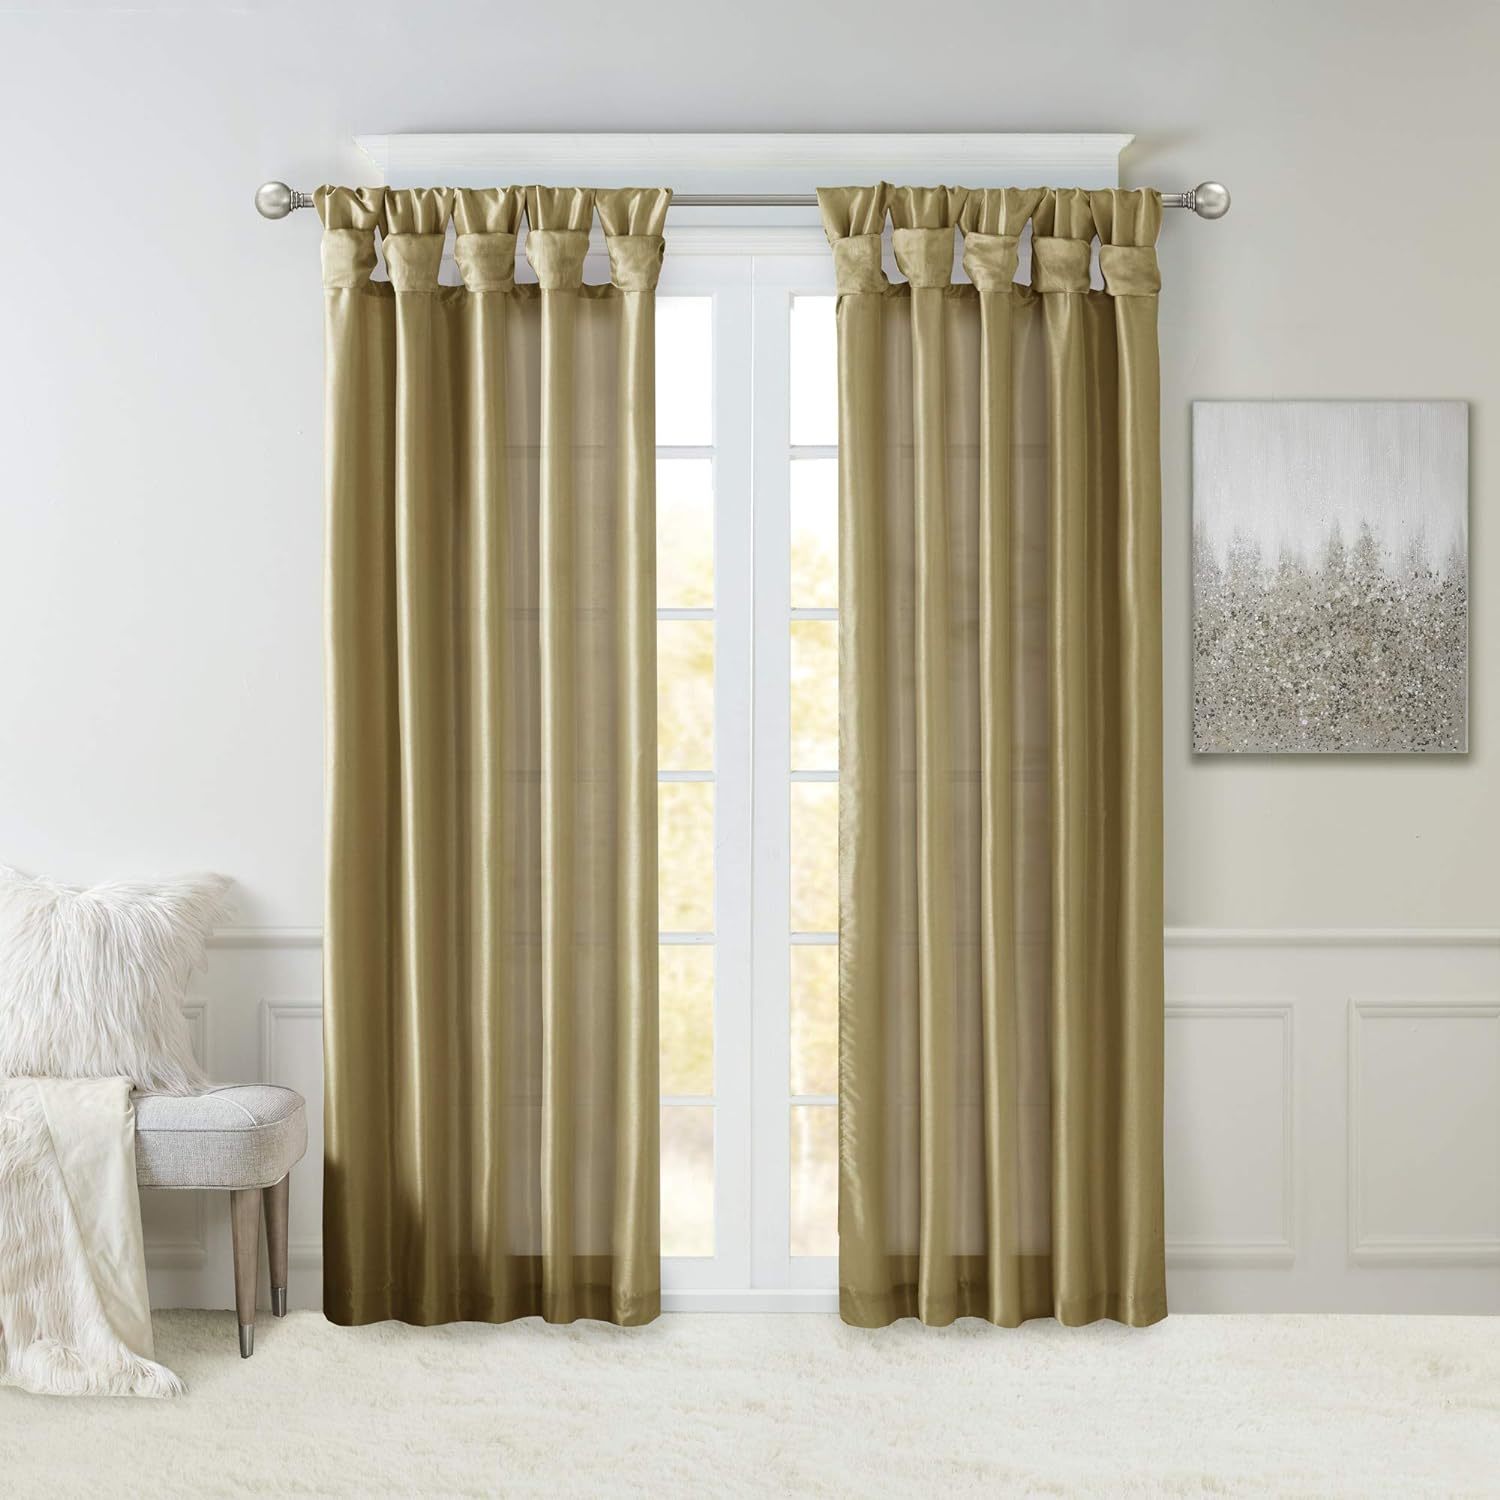 Window Drape For The Living Room, Bedroom, And Dorm By Madison Park, Bronze. - $32.97